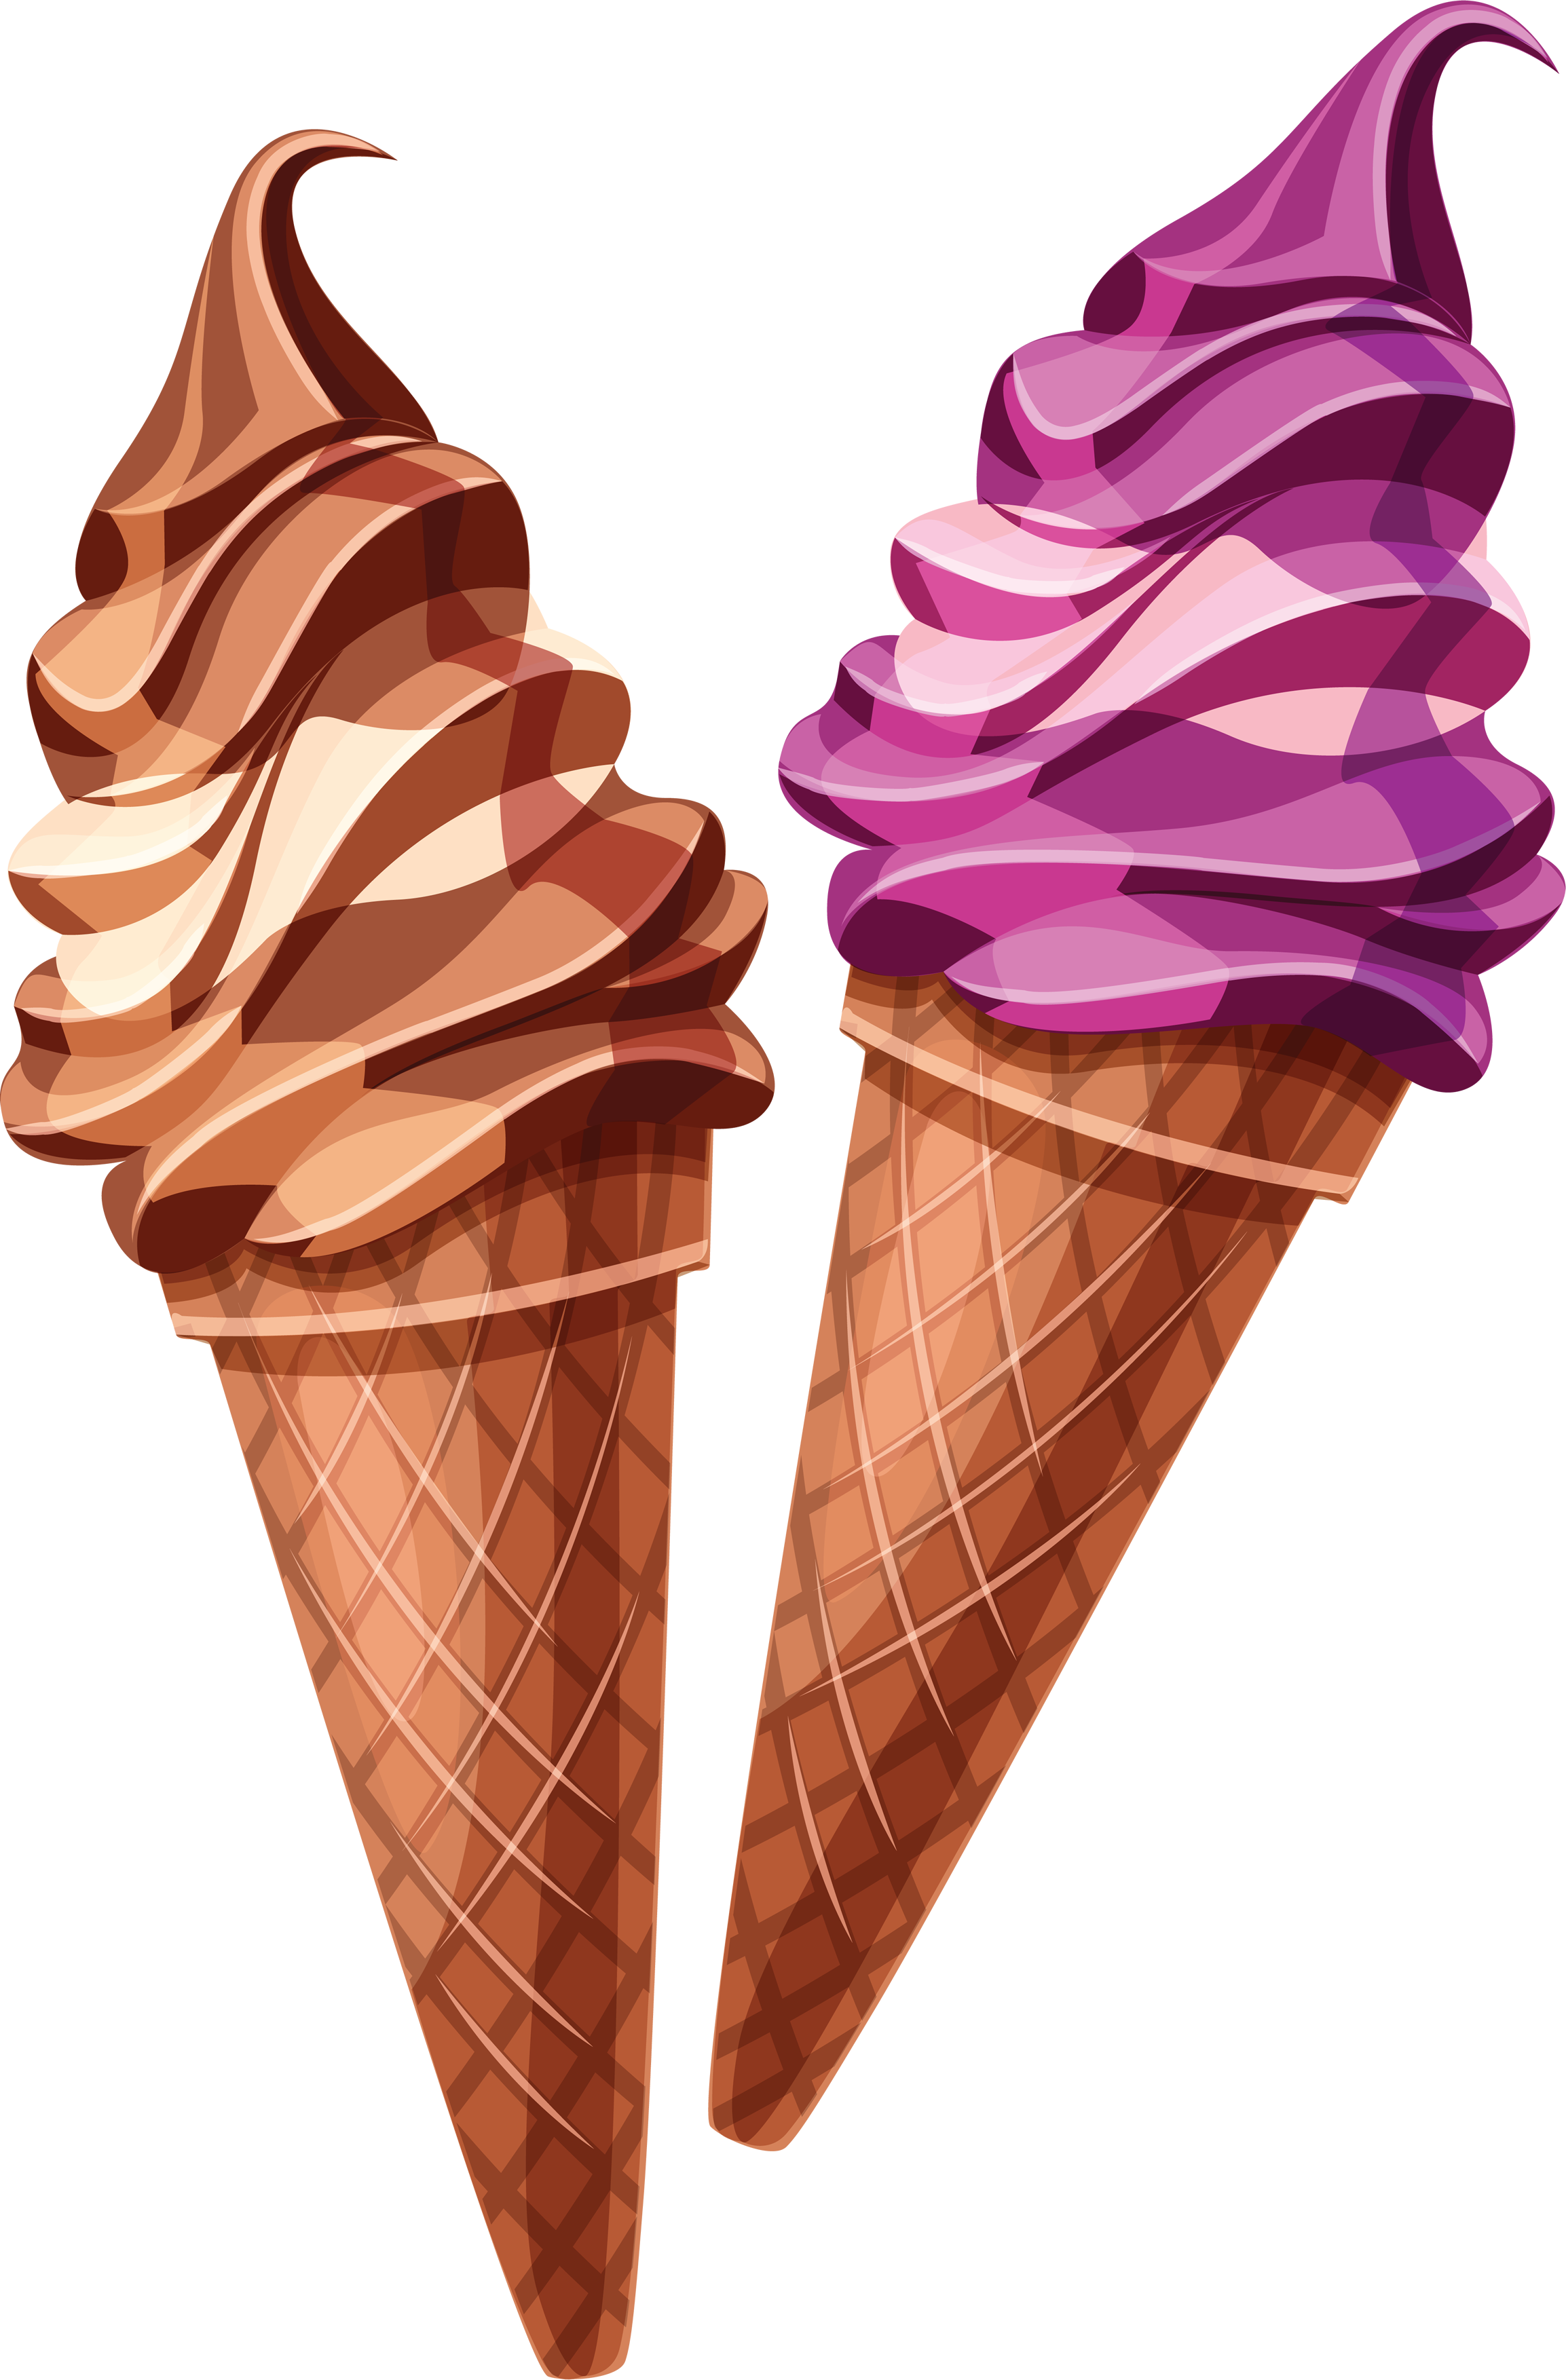 Ice Cream Png Image - Ice Cream Cone Png - HD Wallpaper 